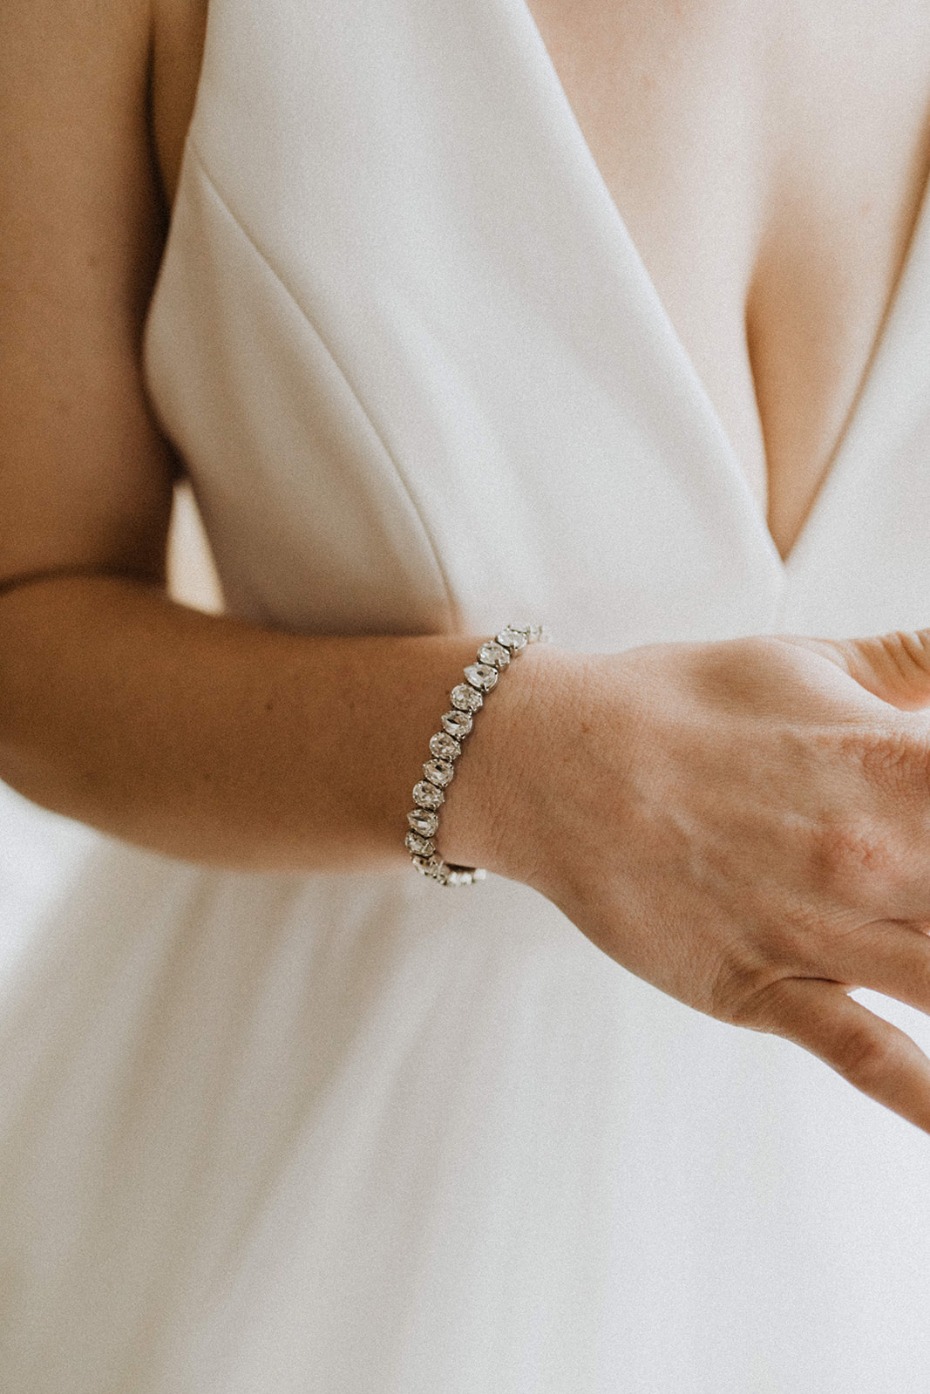 Custom Jewelry Is Definitely Something You Never Knew You Needed for Your Wedding Day